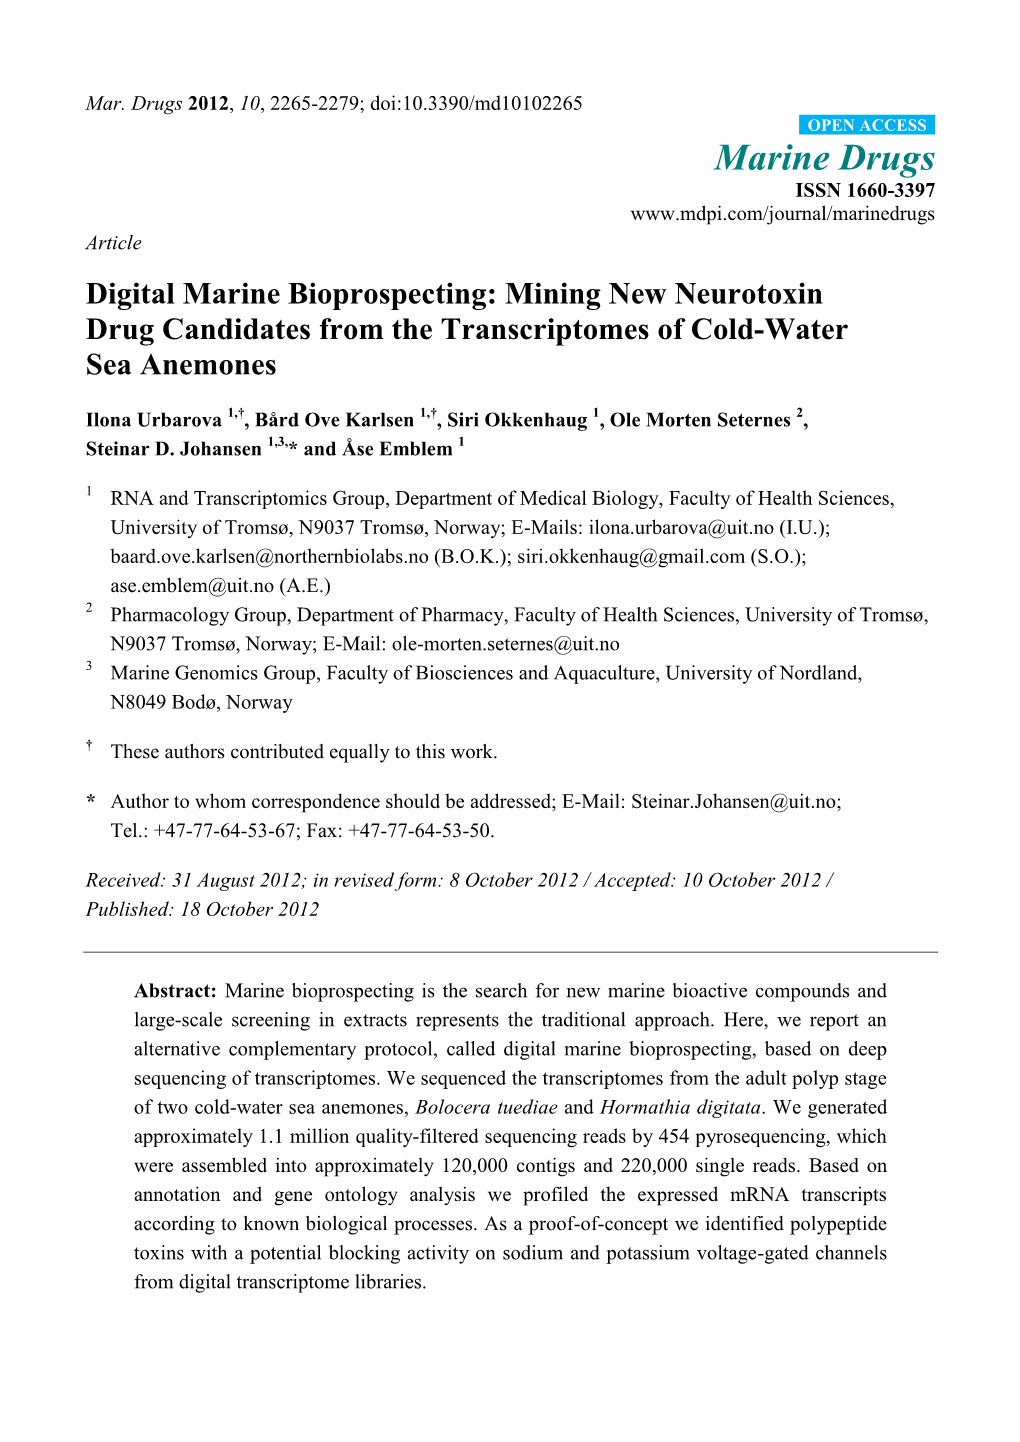 Digital Marine Bioprospecting: Mining New Neurotoxin Drug Candidates from the Transcriptomes of Cold-Water Sea Anemones